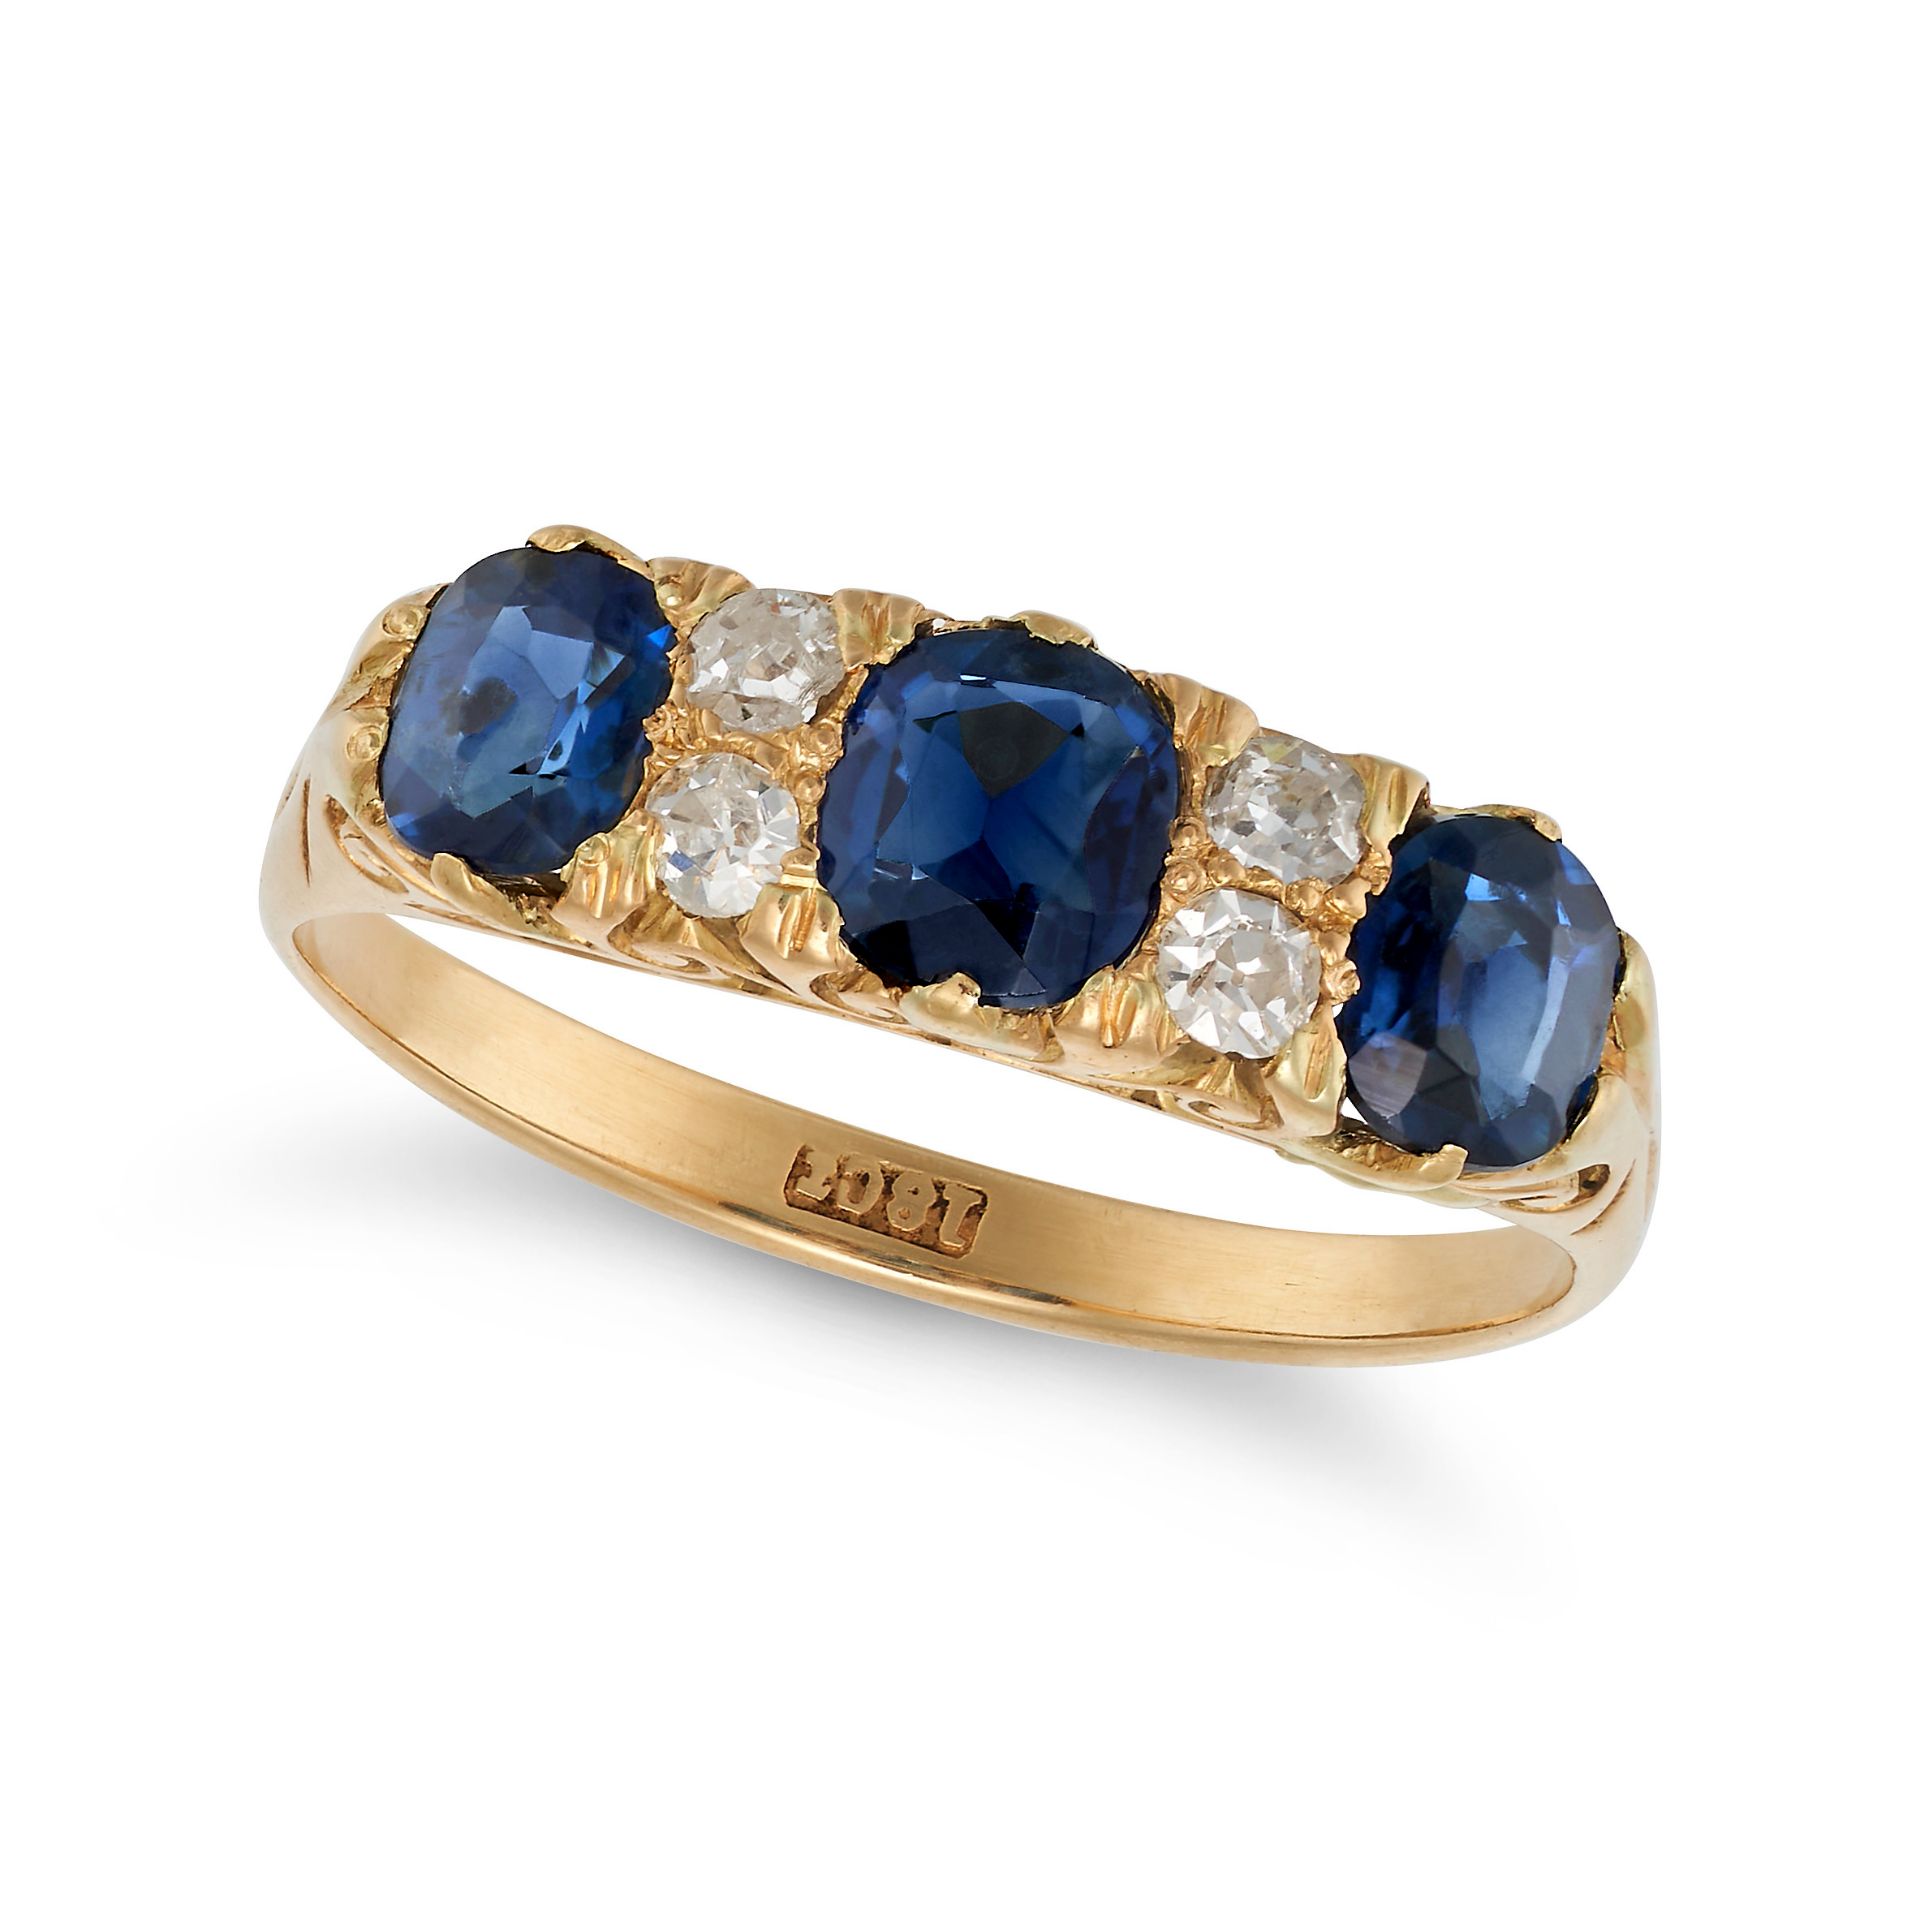 AN ANTIQUE SAPPHIRE AND DIAMOND RING in 18ct yellow gold, set with three cushion cut sapphires ac...